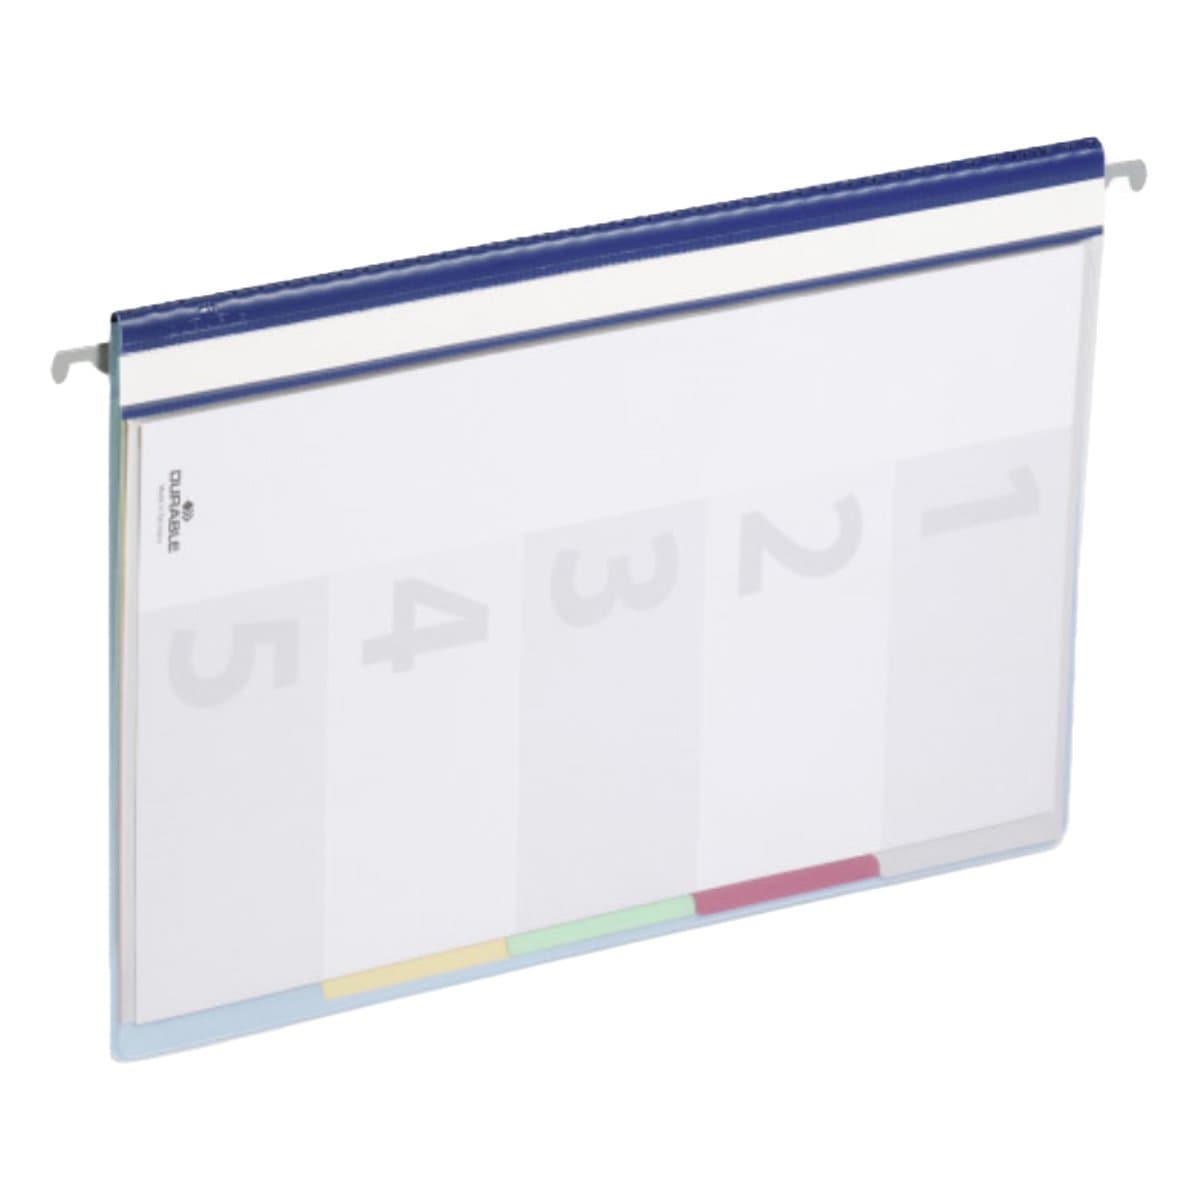 Durable DIVISOFLEX Organiser File with 5 compartments A4, Blue